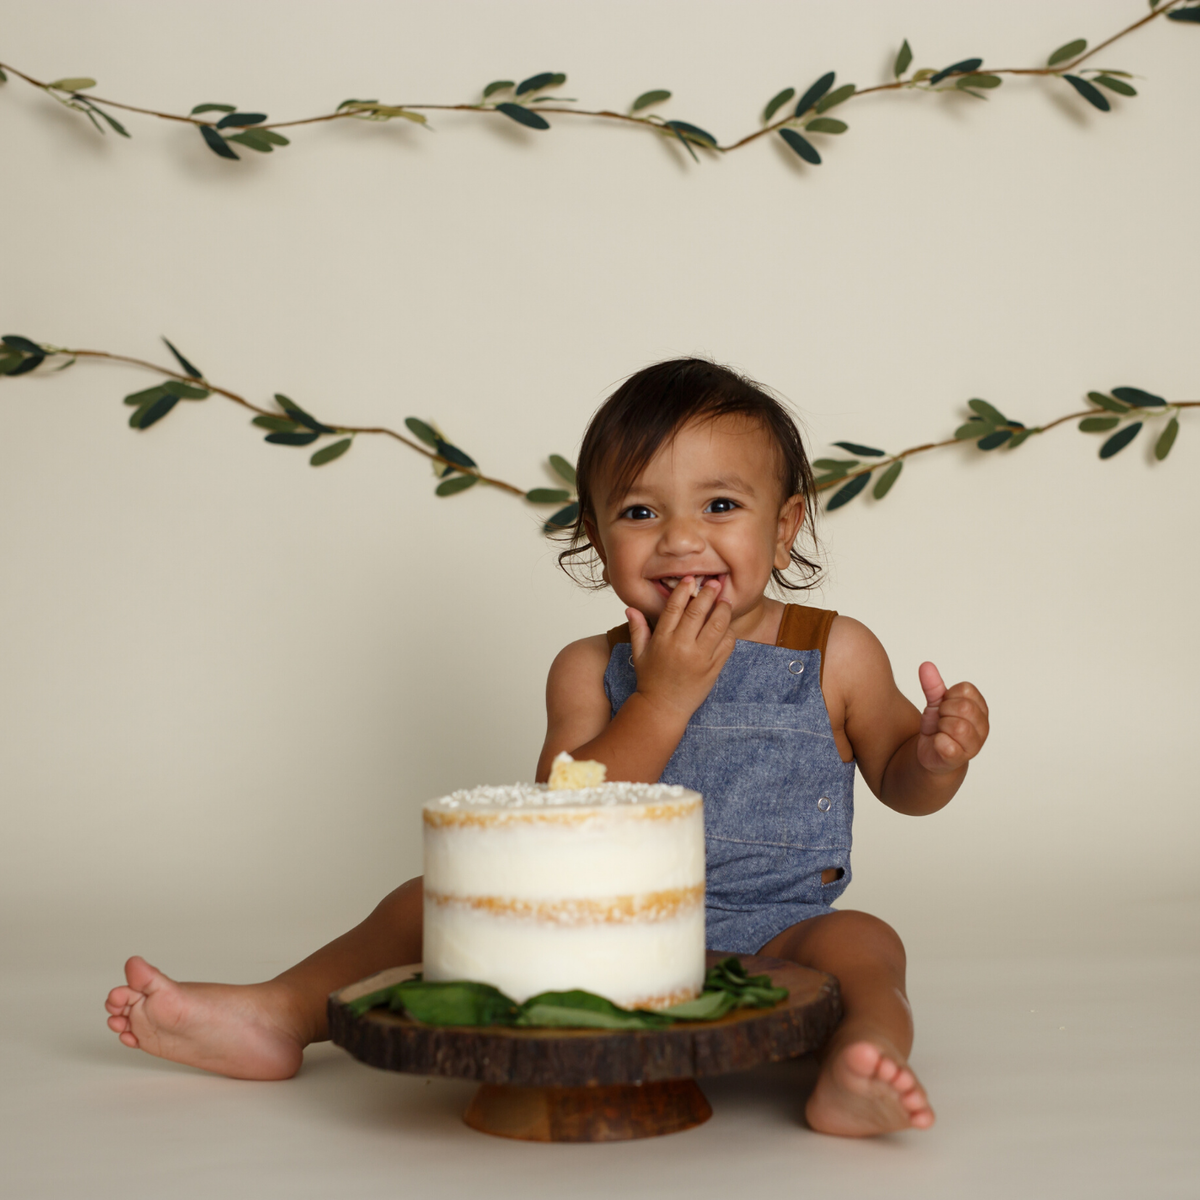 first birthday photography